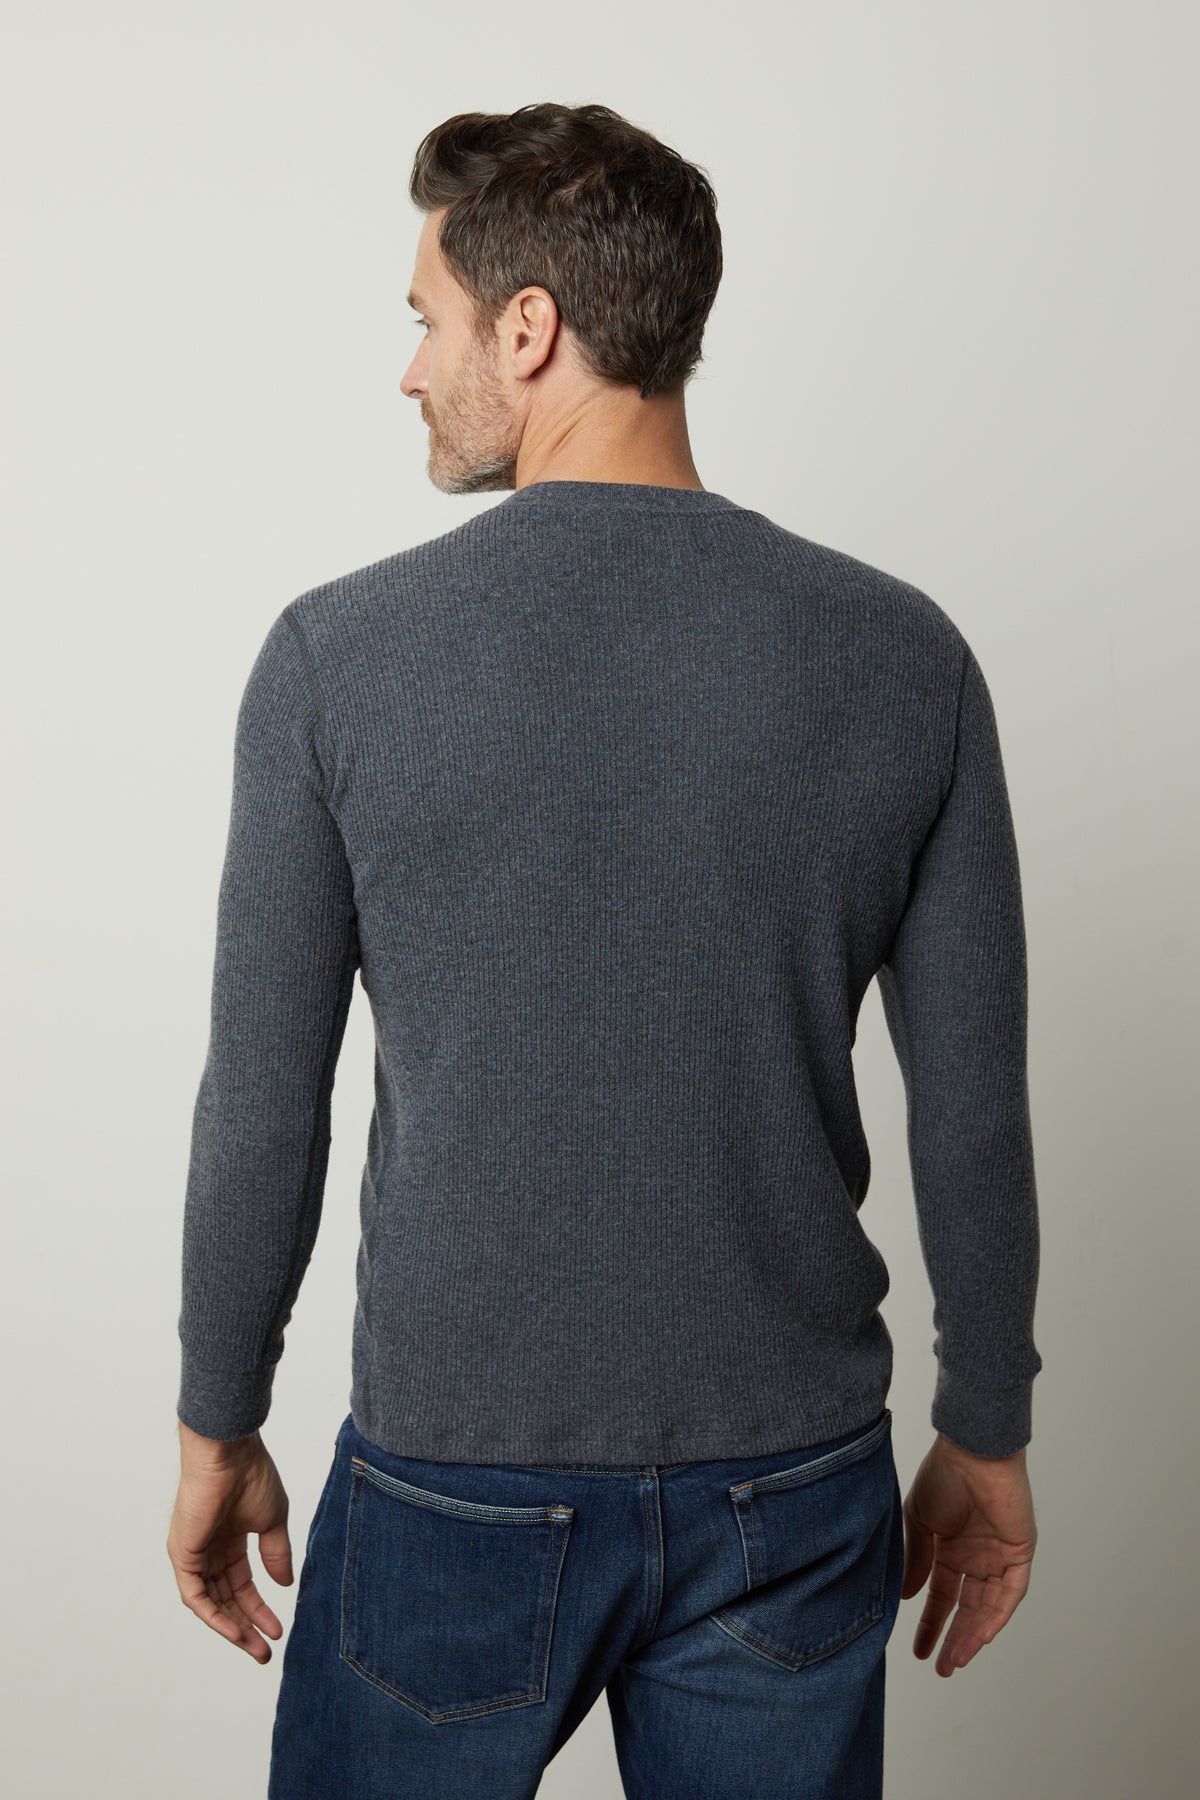   The back view of a man wearing Velvet by Graham & Spencer's Augustus Rib Knit Crew jeans and a grey sweater. 